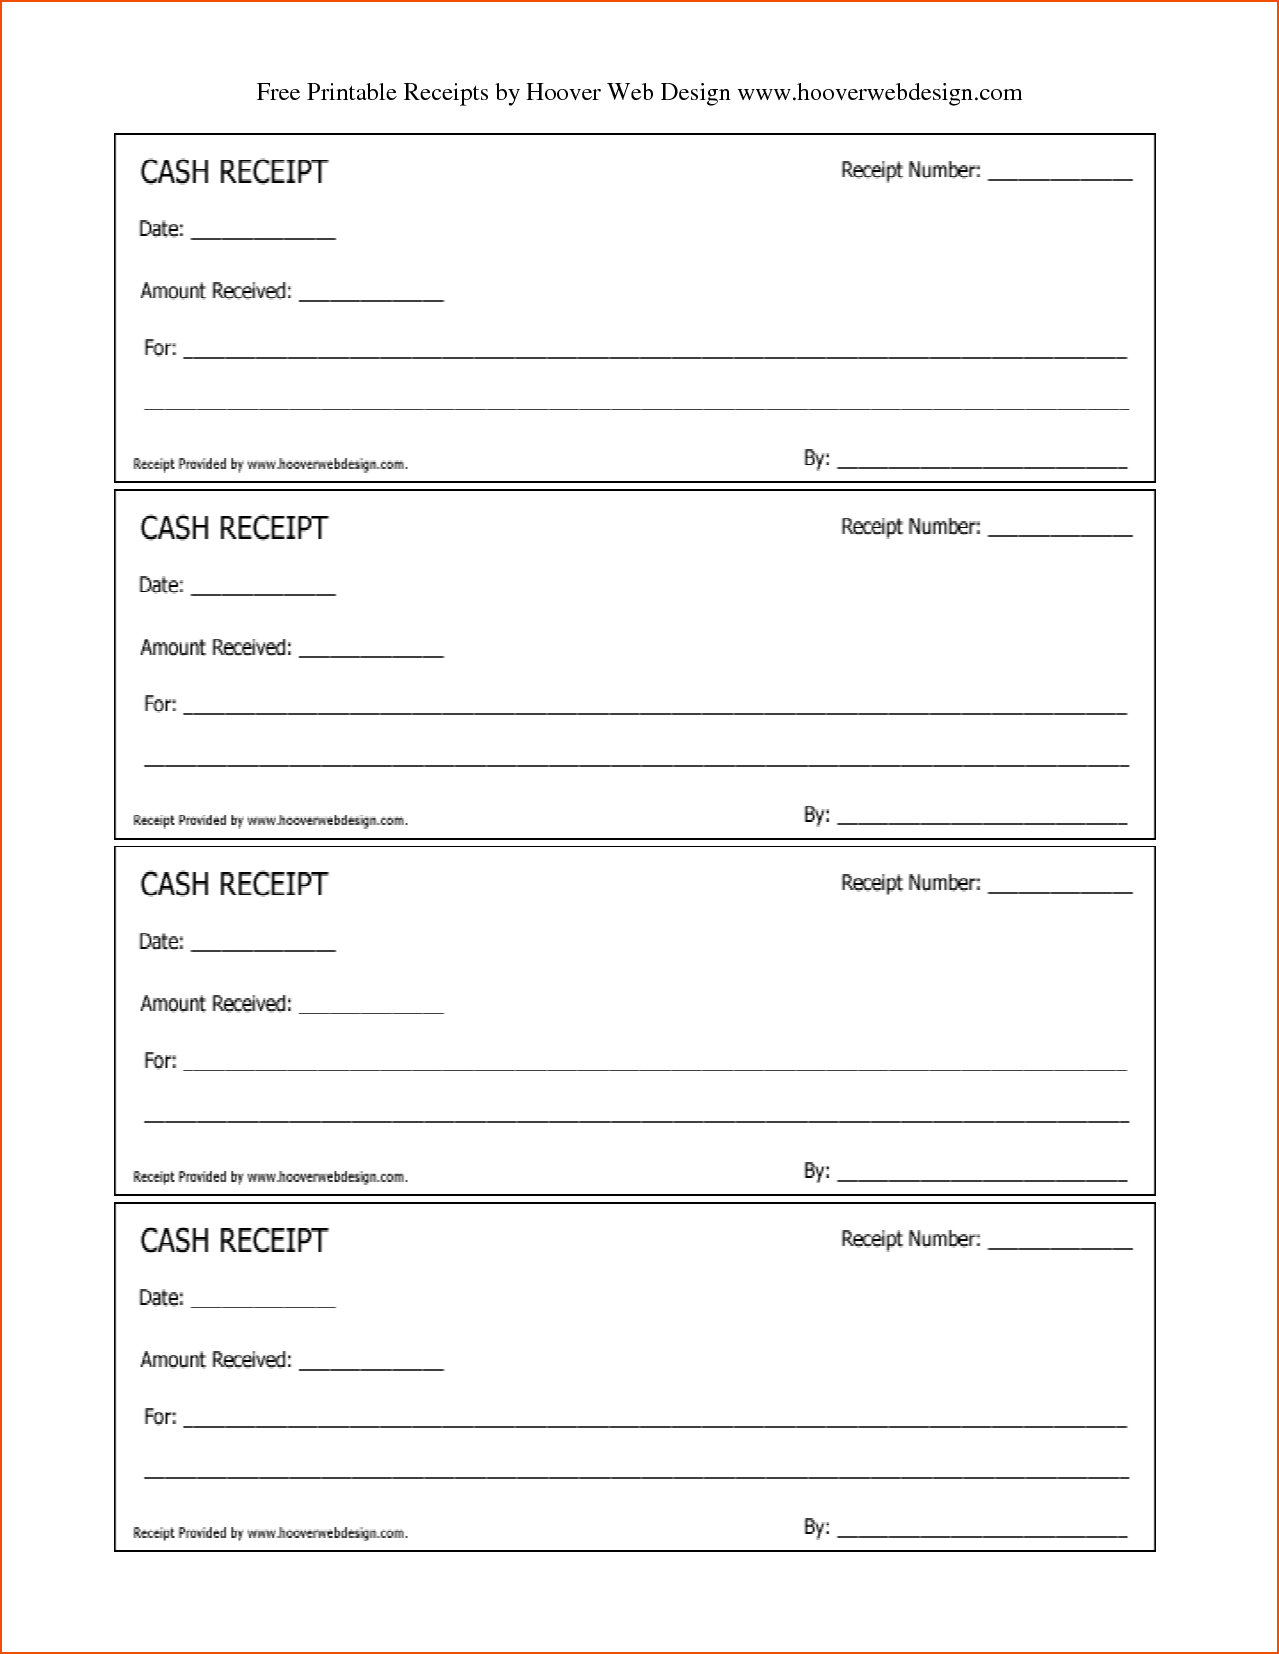 Free Printable Receipts For Services Feedback Templates Personal 